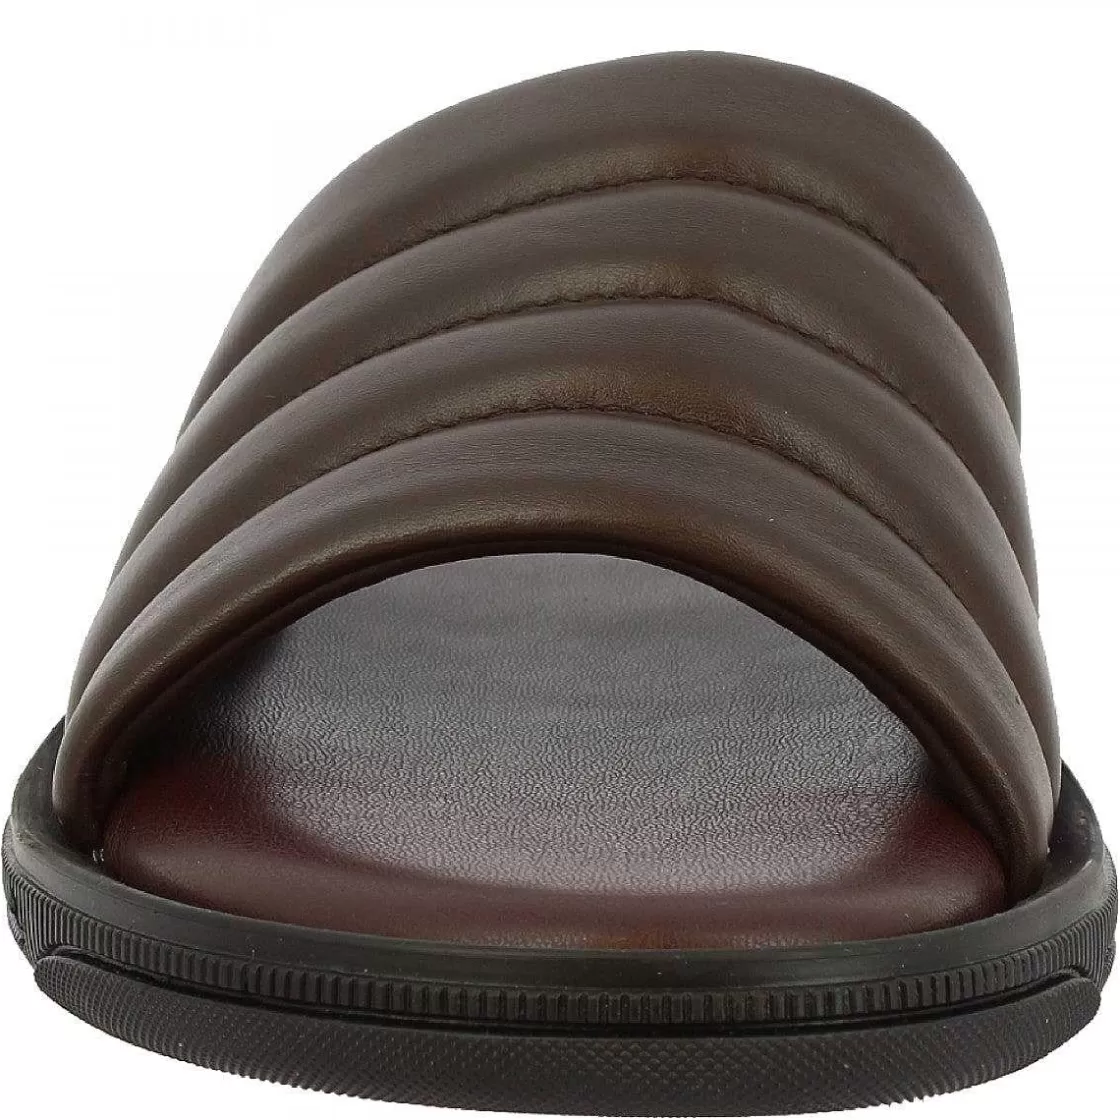 Leonardo Men'S Slipper Sandals With Wide Band Handmade In Brown Calf Leather Cheap